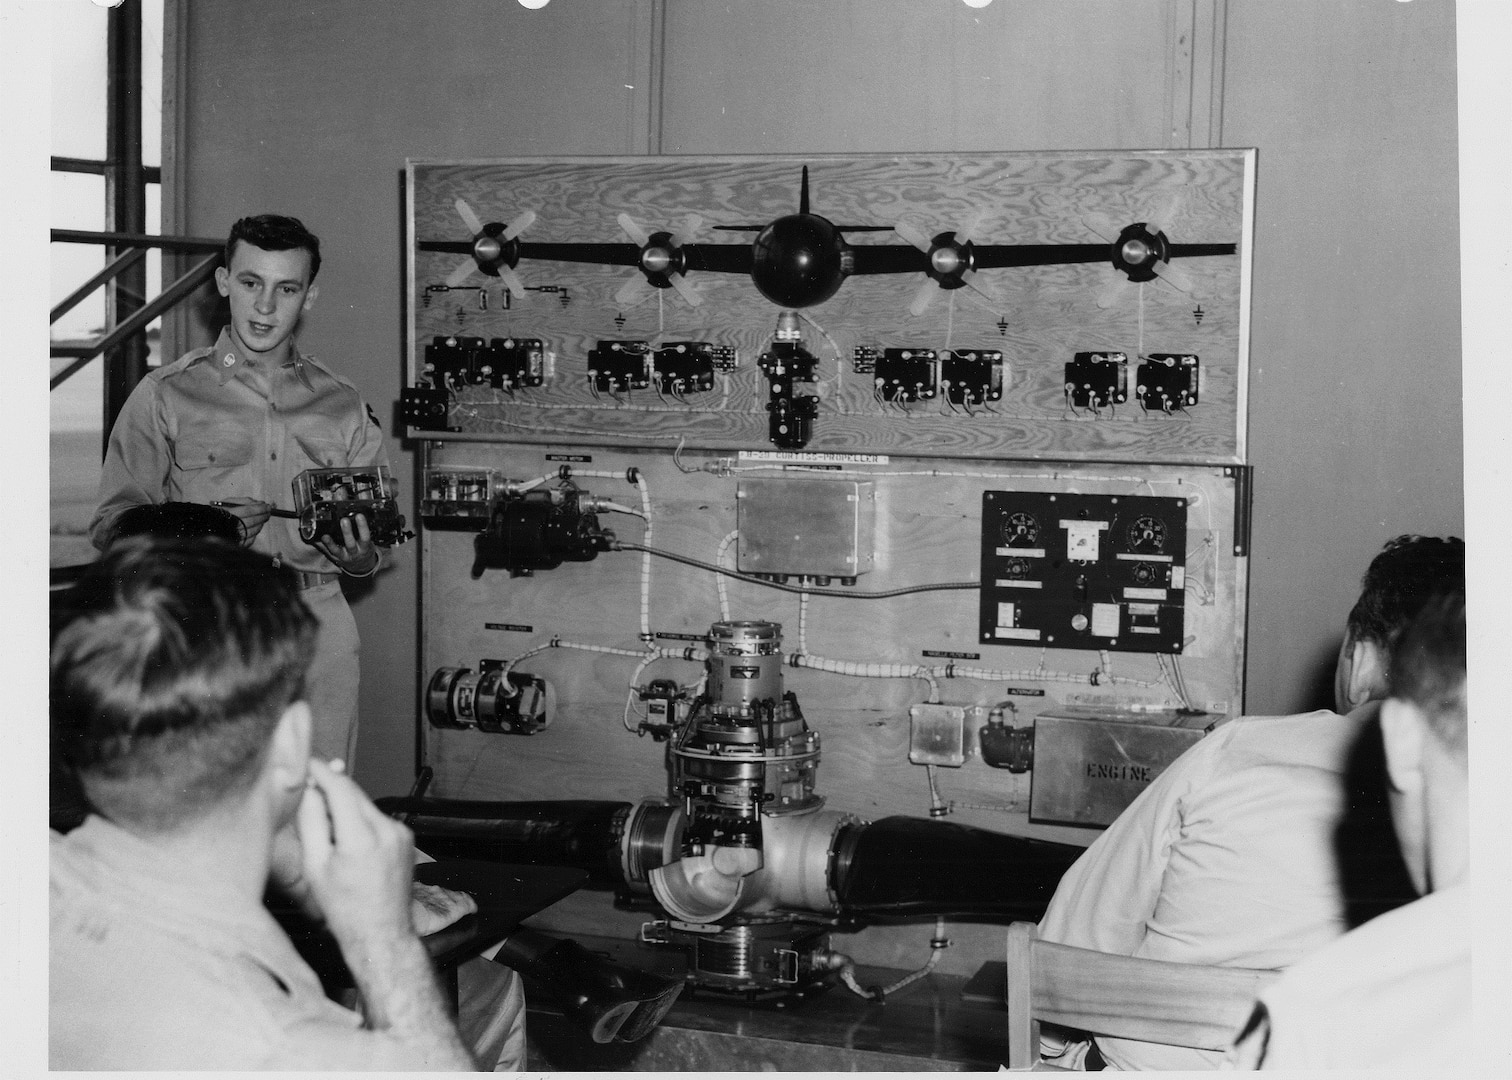 Sixty-three years ago this month, about six months after the outbreak of the Korean War, the first six B-29 combat crews trained at the former Randolph Air Force Base graduated. B-29 combat crew training began at Randolph during the Truman administration and concluded in 1956, the final year of then President Dwight D. Eisenhower’s first term. In that time, more than 21,500 crew members had been trained. (Courstesy photo)